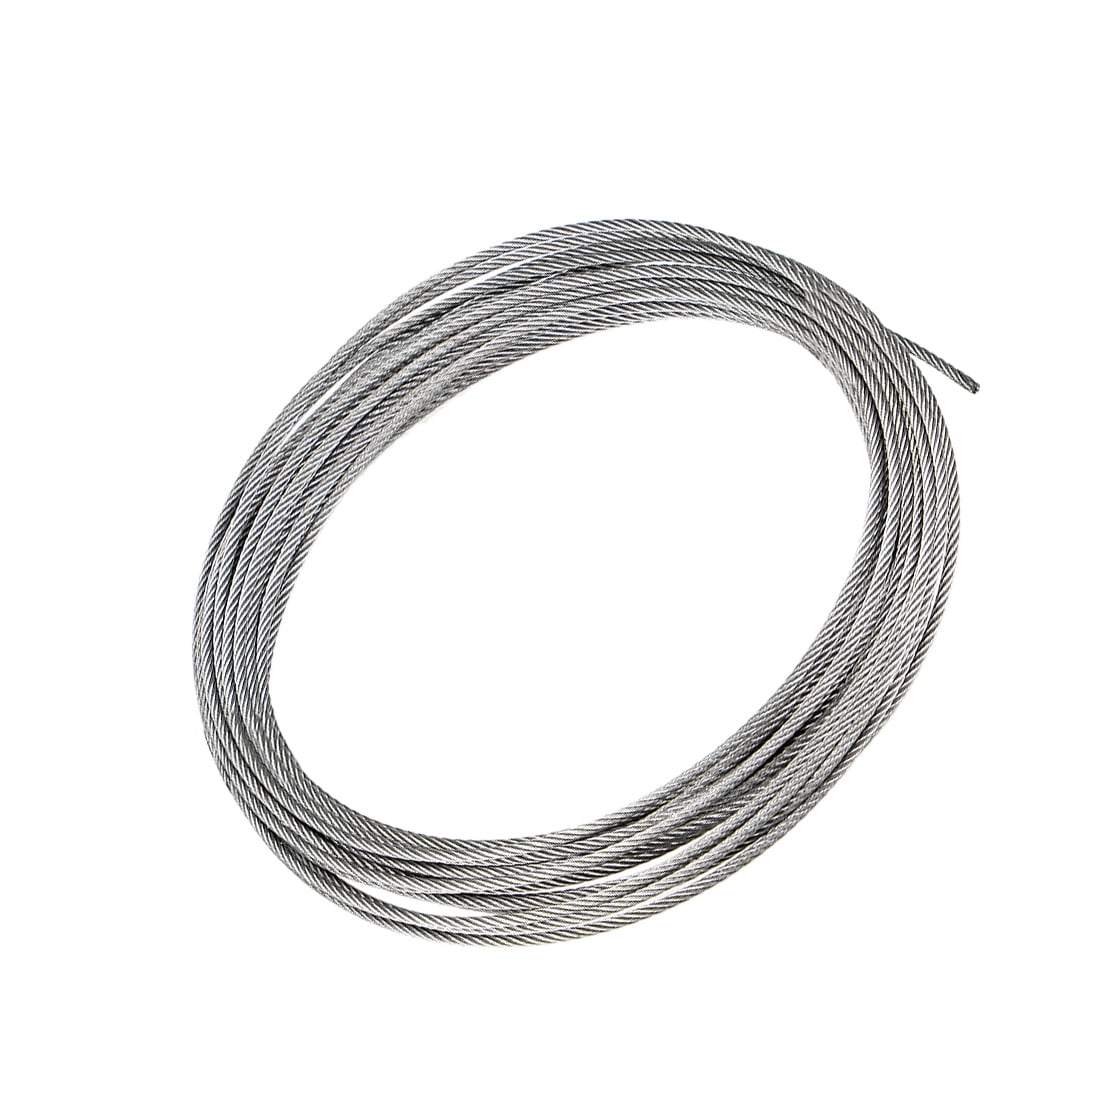  uxcell® 3mm Diameter Flexible Metal Wire Rope Cable 12 Meter  Length : Home & Kitchen